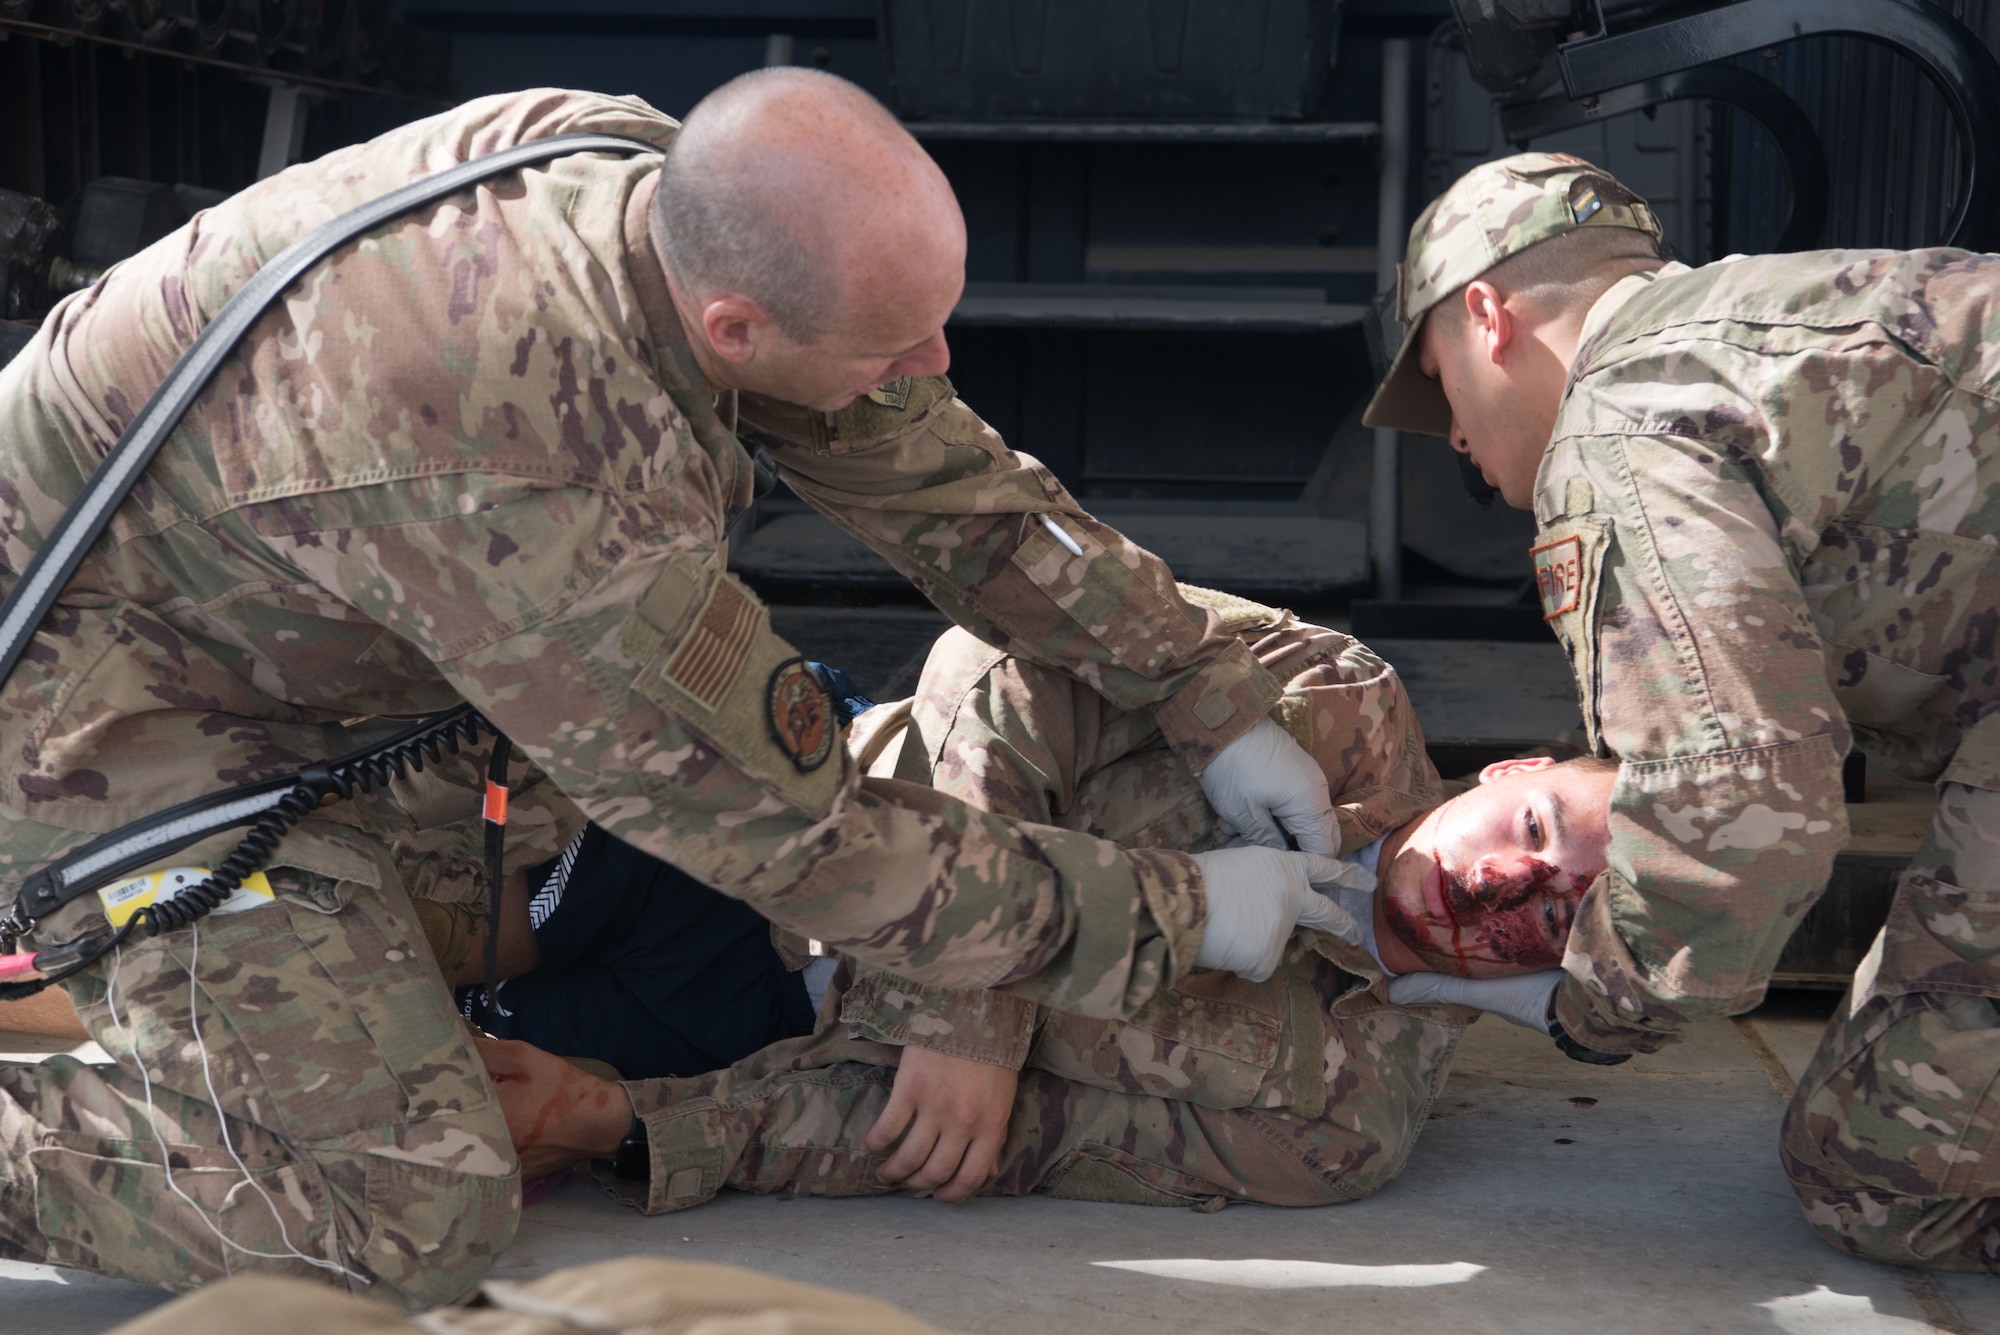 Firefighters assigned to the 380th Expeditionary Civil Engineer Squadron medically evaluate Senior Airman Naseem Eissa, 380th Expeditionary Logistics Readiness Squadron ground transportation operator, a moulage victim, during an exercise Sept. 24, 2019, on Al Dhafra Air Base, United Arab Emirates. A variety of agencies including medics, firefighters and security forces defenders participated in the exercise to test their readiness, knowledge of emergency procedures and interagency cooperation amongst the wing’s first responders. (U.S. Air Force photo by Tech. Sgt. Jocelyn A. Ford)